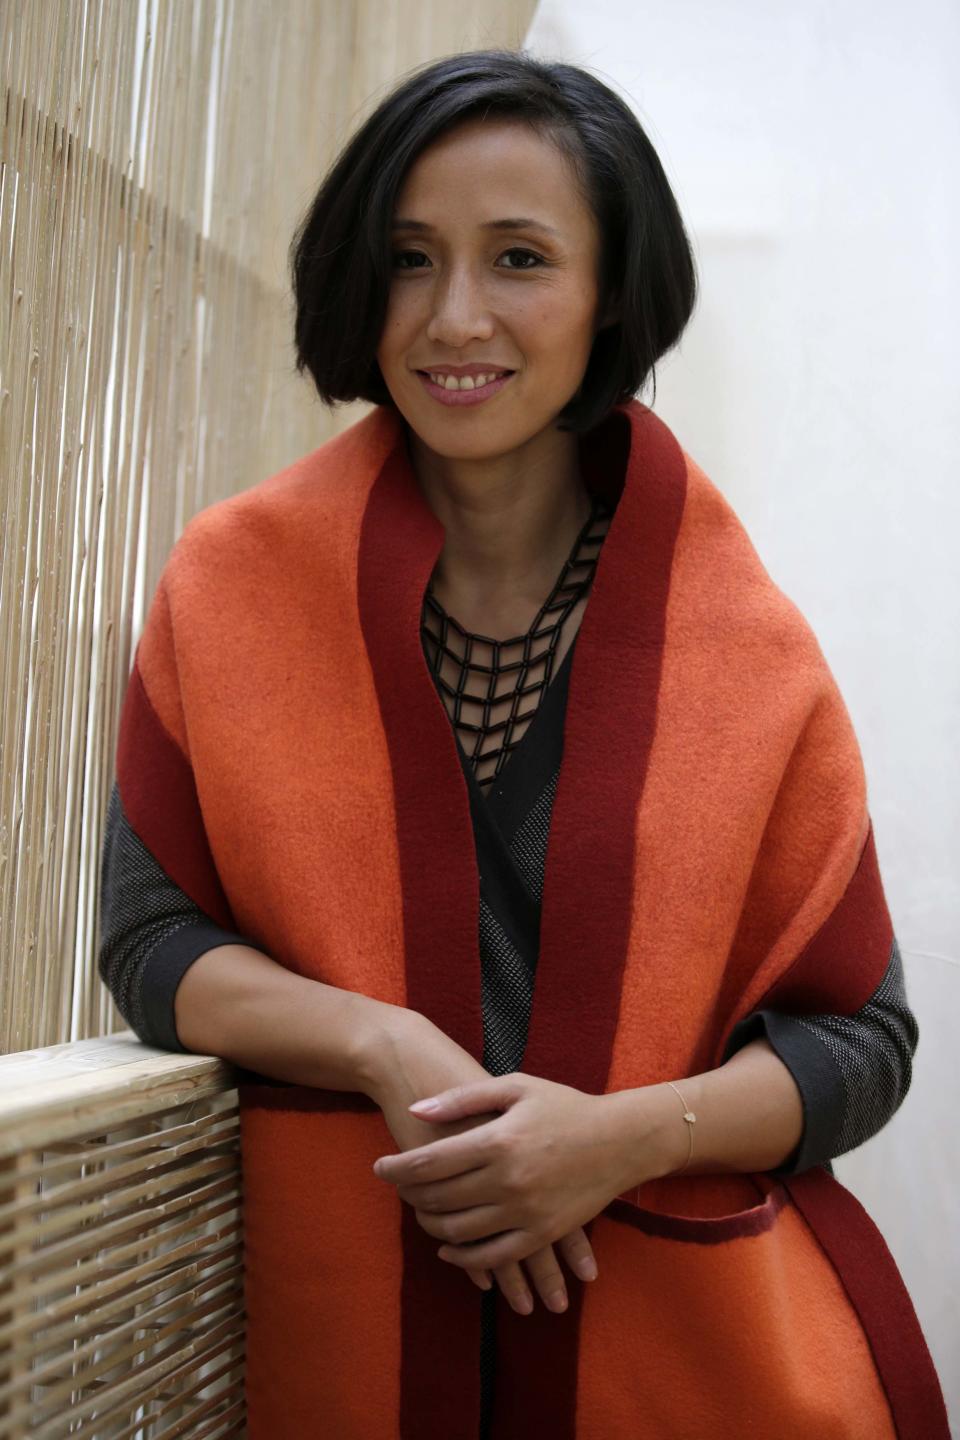 Jiang Qiong Er, Shang Xia's artistic director and chief executive, poses during a Chinese tea ceremony in Paris September 11, 2013. Shang Xia, the Chinese-born brand backed by French luxury goods group Hermes, opened its first shop outside its home market in Paris on Wednesday to test appetite among non-Chinese customers for its handcrafted products. The brand is trying to build a business centred on the revival of traditional Chinese crafts such as porcelain, cashmere felt and furniture, that were all but nearly destroyed by China's proletarian Cultural Revolution. REUTERS/Jacky Naegelen (FRANCE - Tags: FASHION BUSINESS)